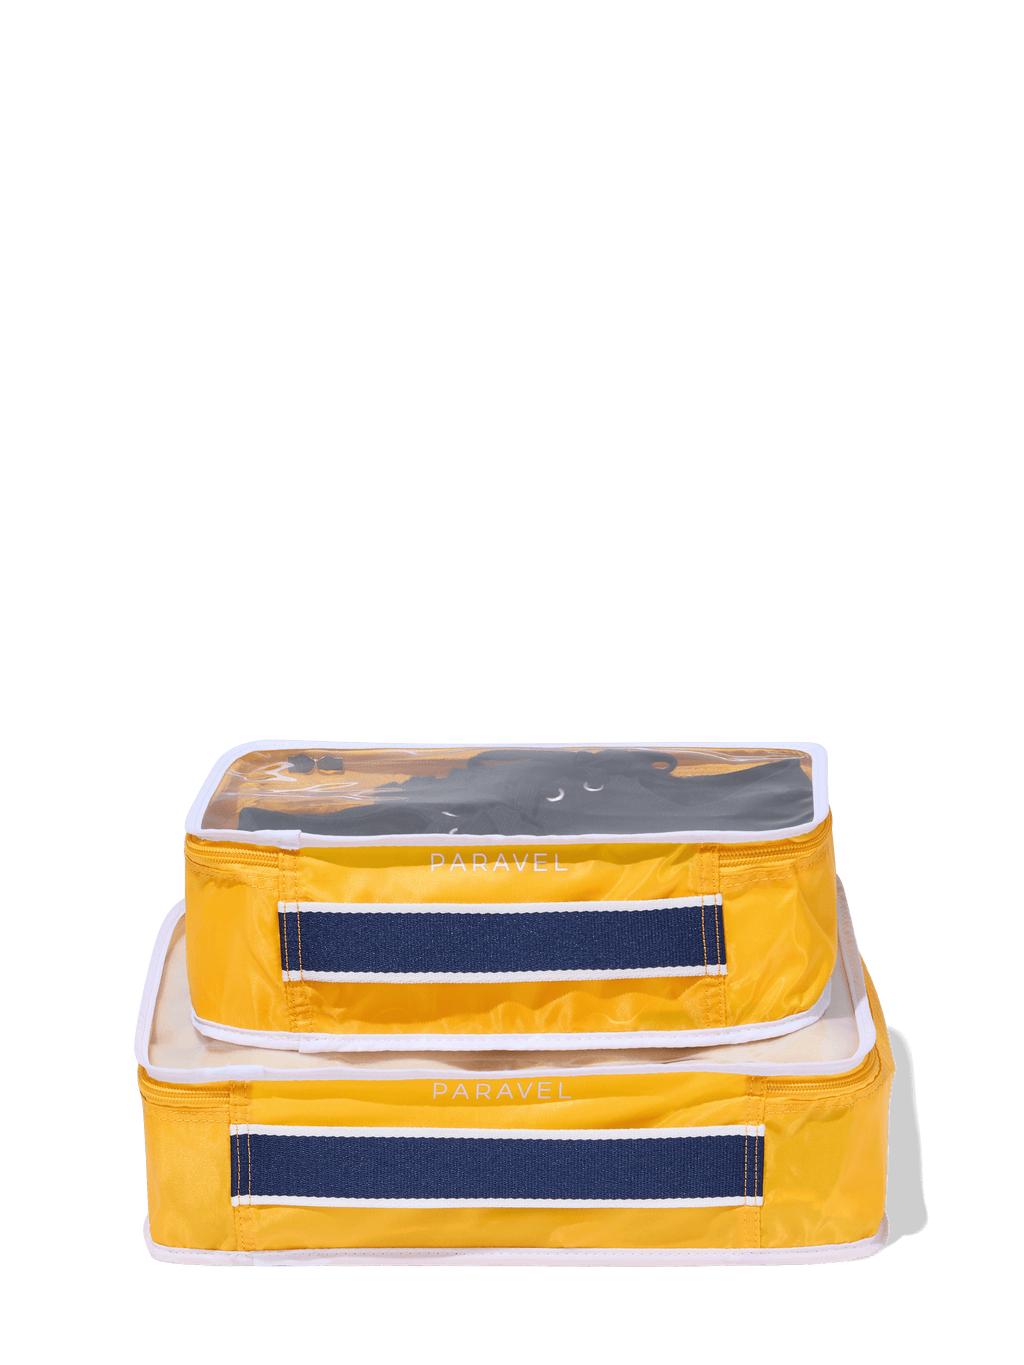 Paravel Full View Packing Cube Duo Canyon Yellow